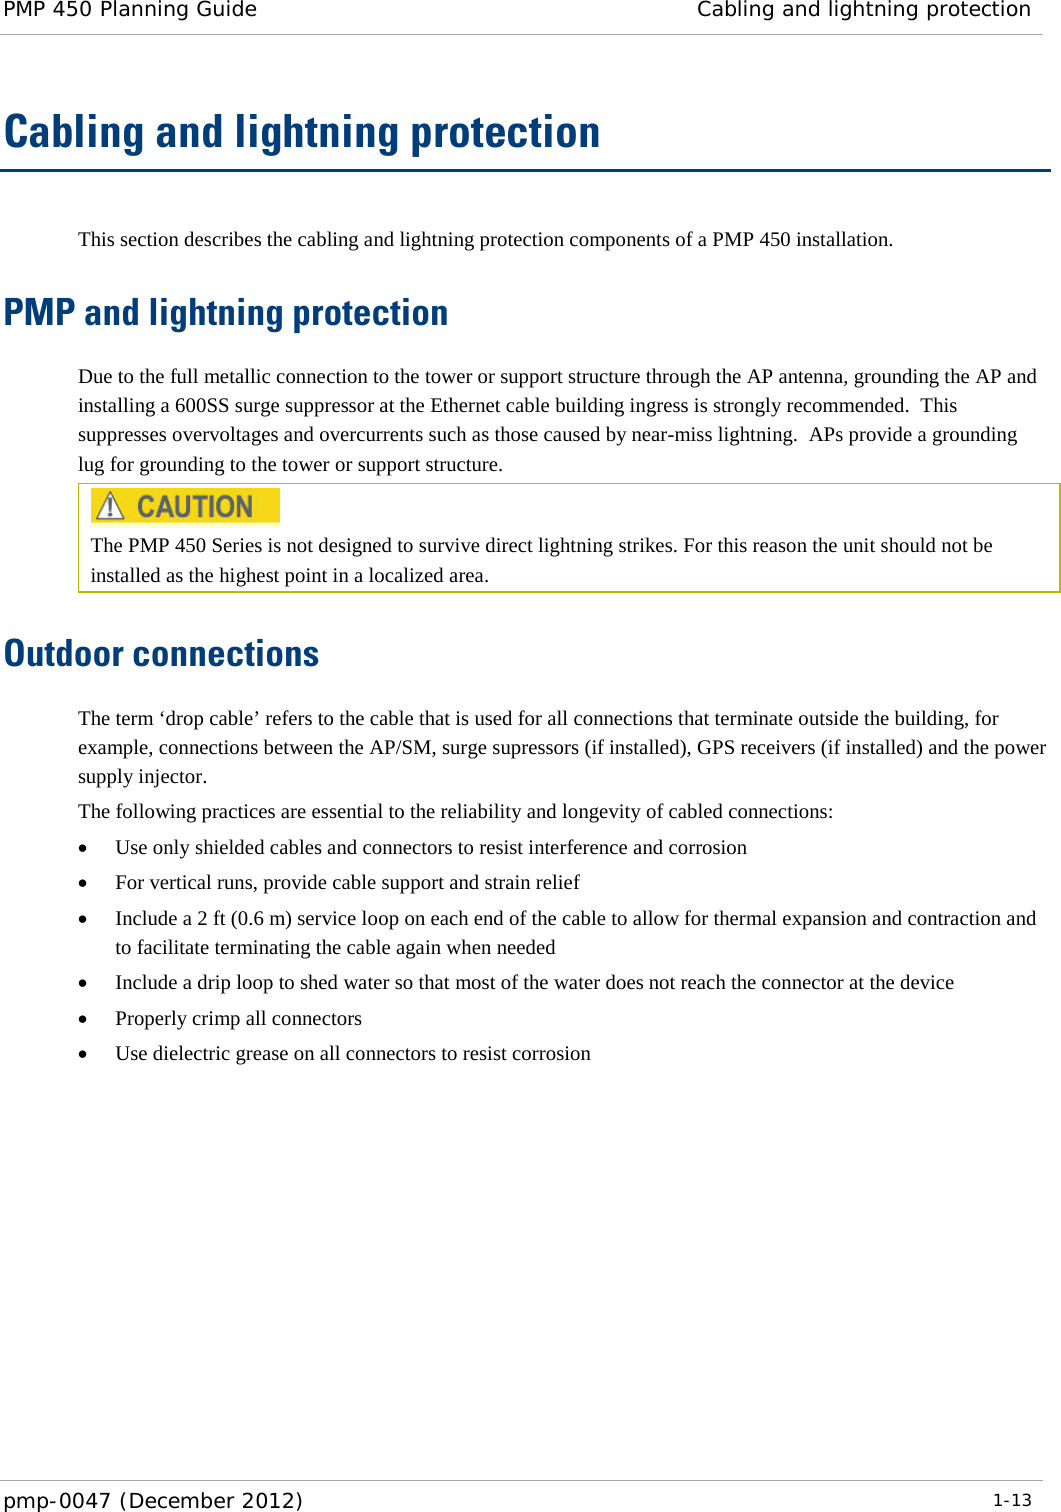 PMP 450 Planning Guide Cabling and lightning protection  pmp-0047 (December 2012)  1-13  Cabling and lightning protection This section describes the cabling and lightning protection components of a PMP 450 installation. PMP and lightning protection Due to the full metallic connection to the tower or support structure through the AP antenna, grounding the AP and installing a 600SS surge suppressor at the Ethernet cable building ingress is strongly recommended.  This suppresses overvoltages and overcurrents such as those caused by near-miss lightning.  APs provide a grounding lug for grounding to the tower or support structure.  The PMP 450 Series is not designed to survive direct lightning strikes. For this reason the unit should not be installed as the highest point in a localized area. Outdoor connections The term ‘drop cable’ refers to the cable that is used for all connections that terminate outside the building, for example, connections between the AP/SM, surge supressors (if installed), GPS receivers (if installed) and the power supply injector. The following practices are essential to the reliability and longevity of cabled connections: • Use only shielded cables and connectors to resist interference and corrosion • For vertical runs, provide cable support and strain relief • Include a 2 ft (0.6 m) service loop on each end of the cable to allow for thermal expansion and contraction and to facilitate terminating the cable again when needed • Include a drip loop to shed water so that most of the water does not reach the connector at the device • Properly crimp all connectors • Use dielectric grease on all connectors to resist corrosion  